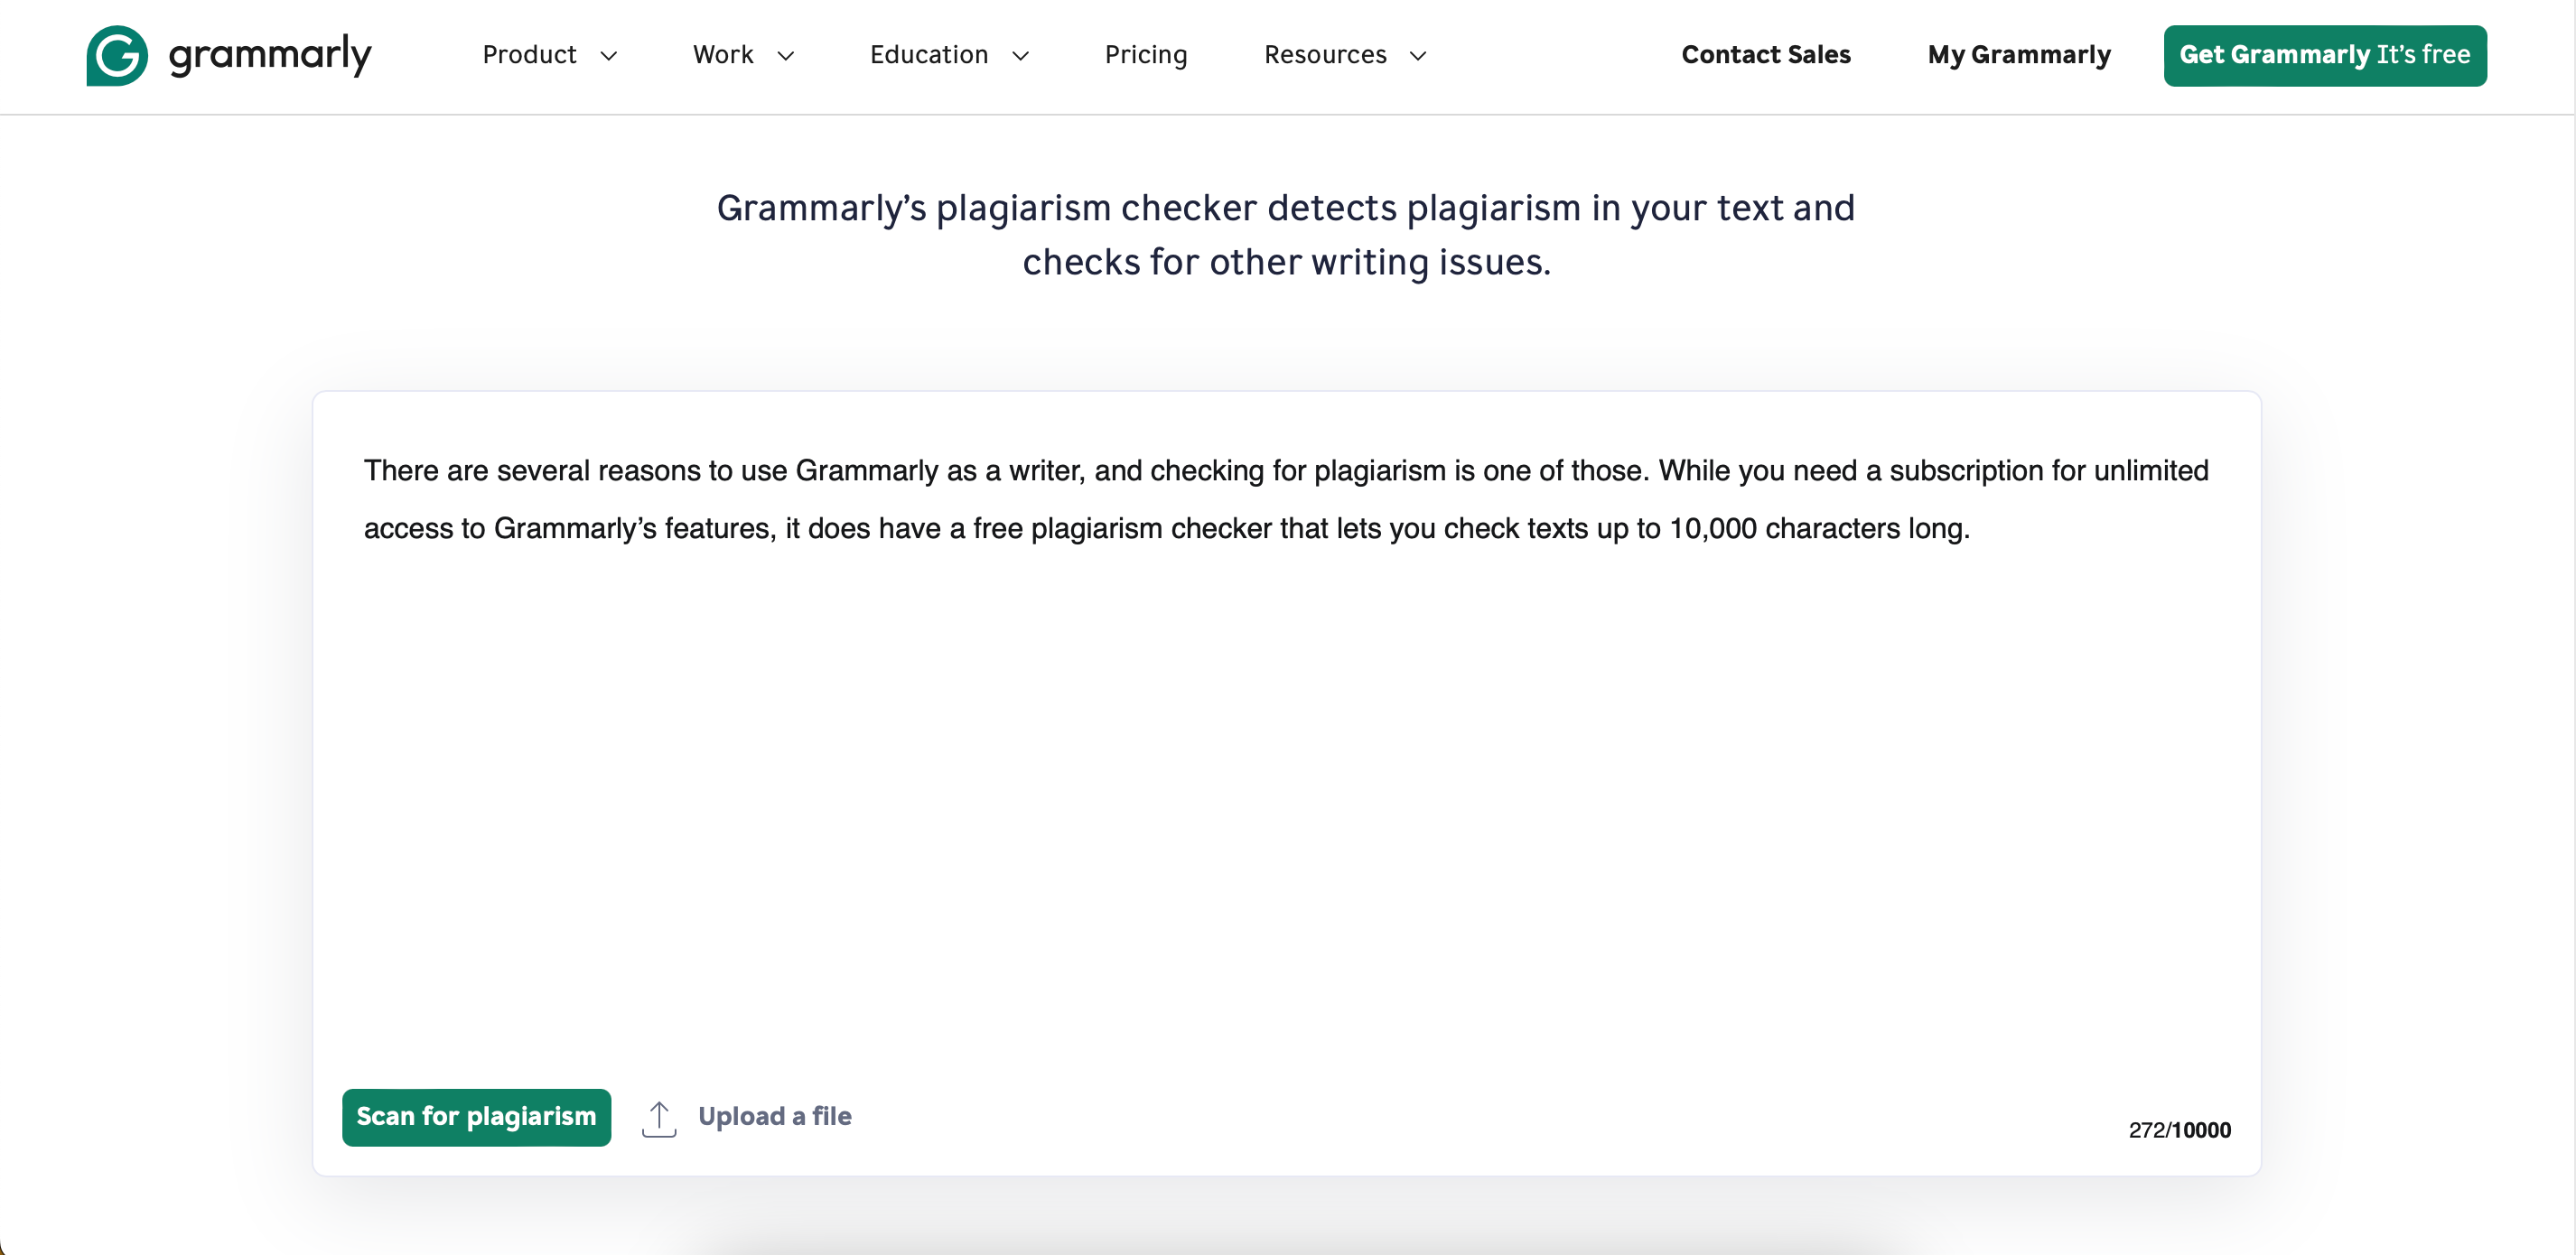 Scan for Plagiarism in Grammarly